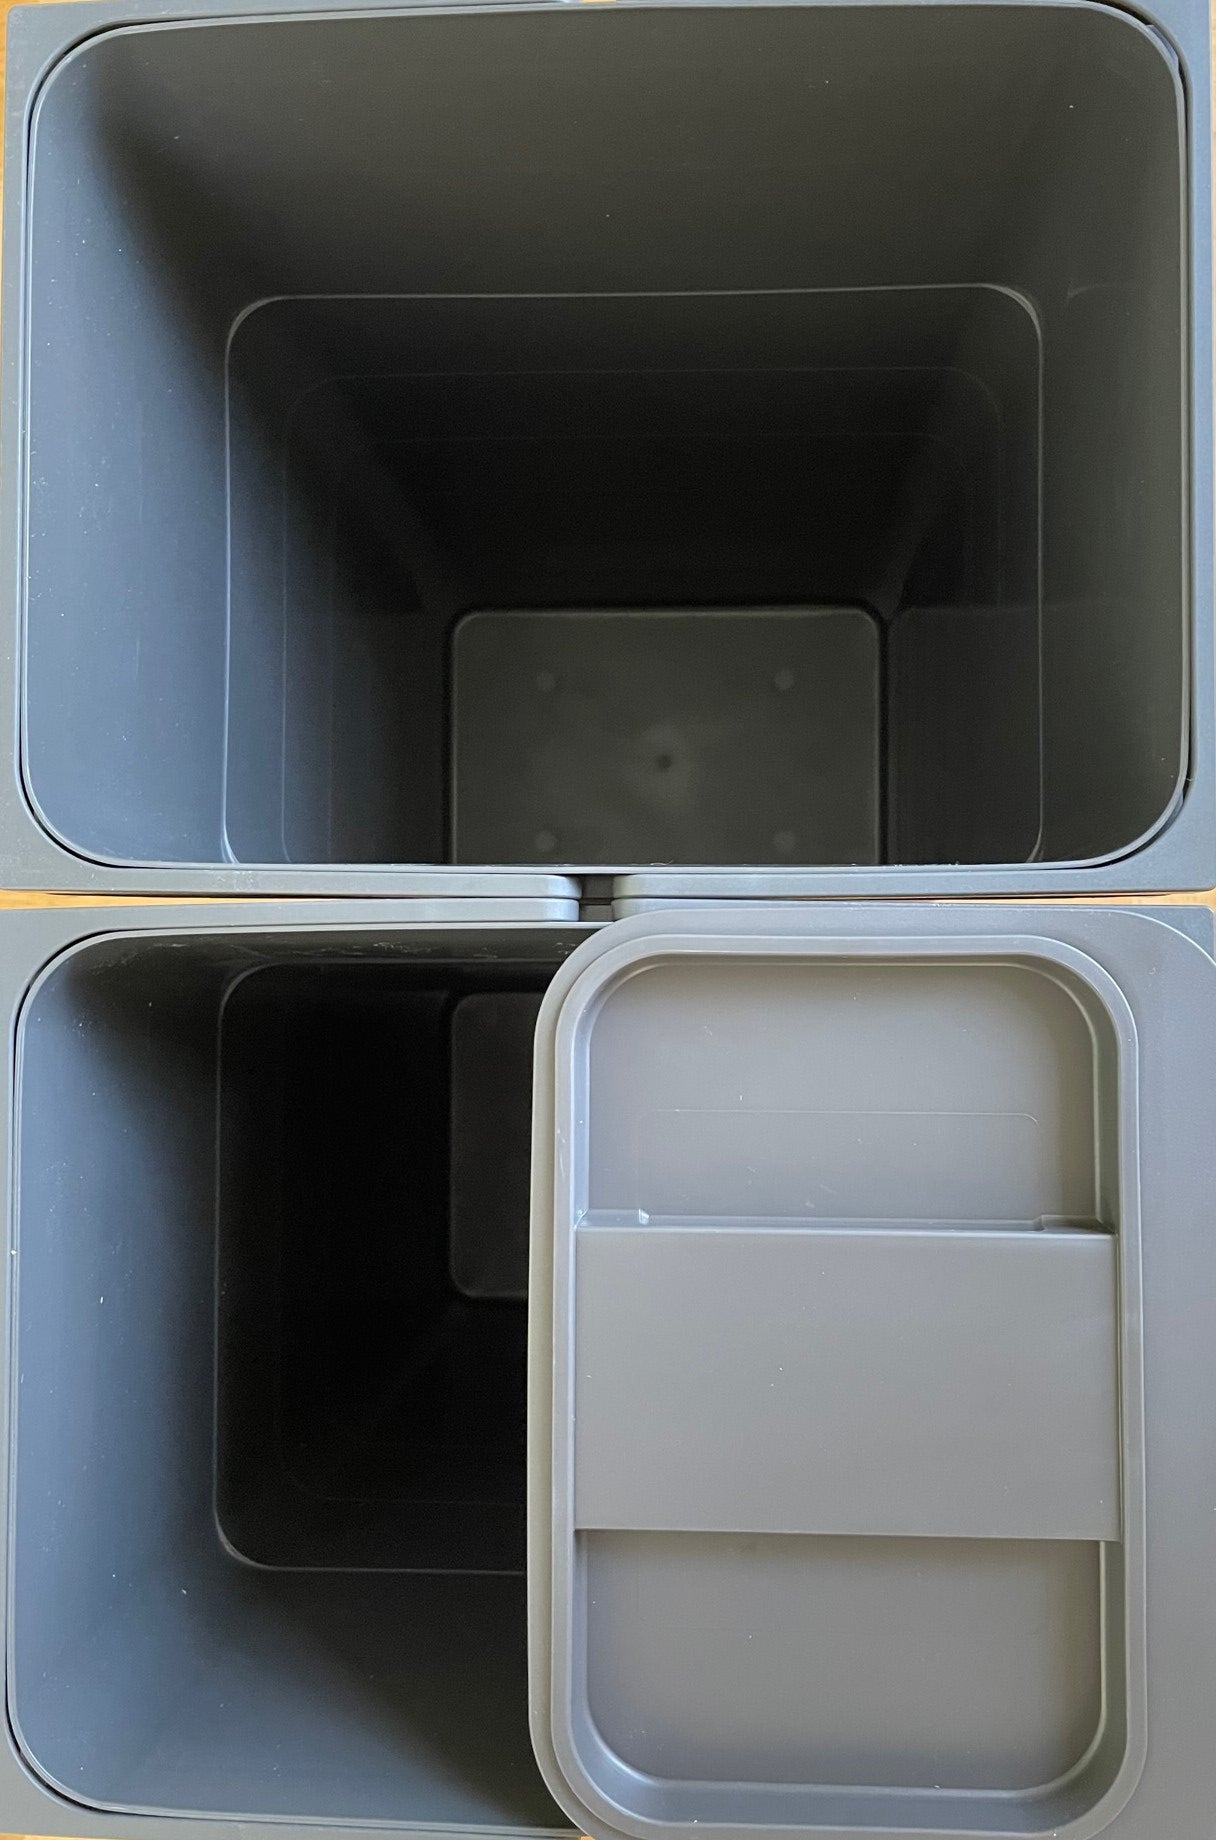 the food caddy nestles in top of one of the 32l buckets for storage